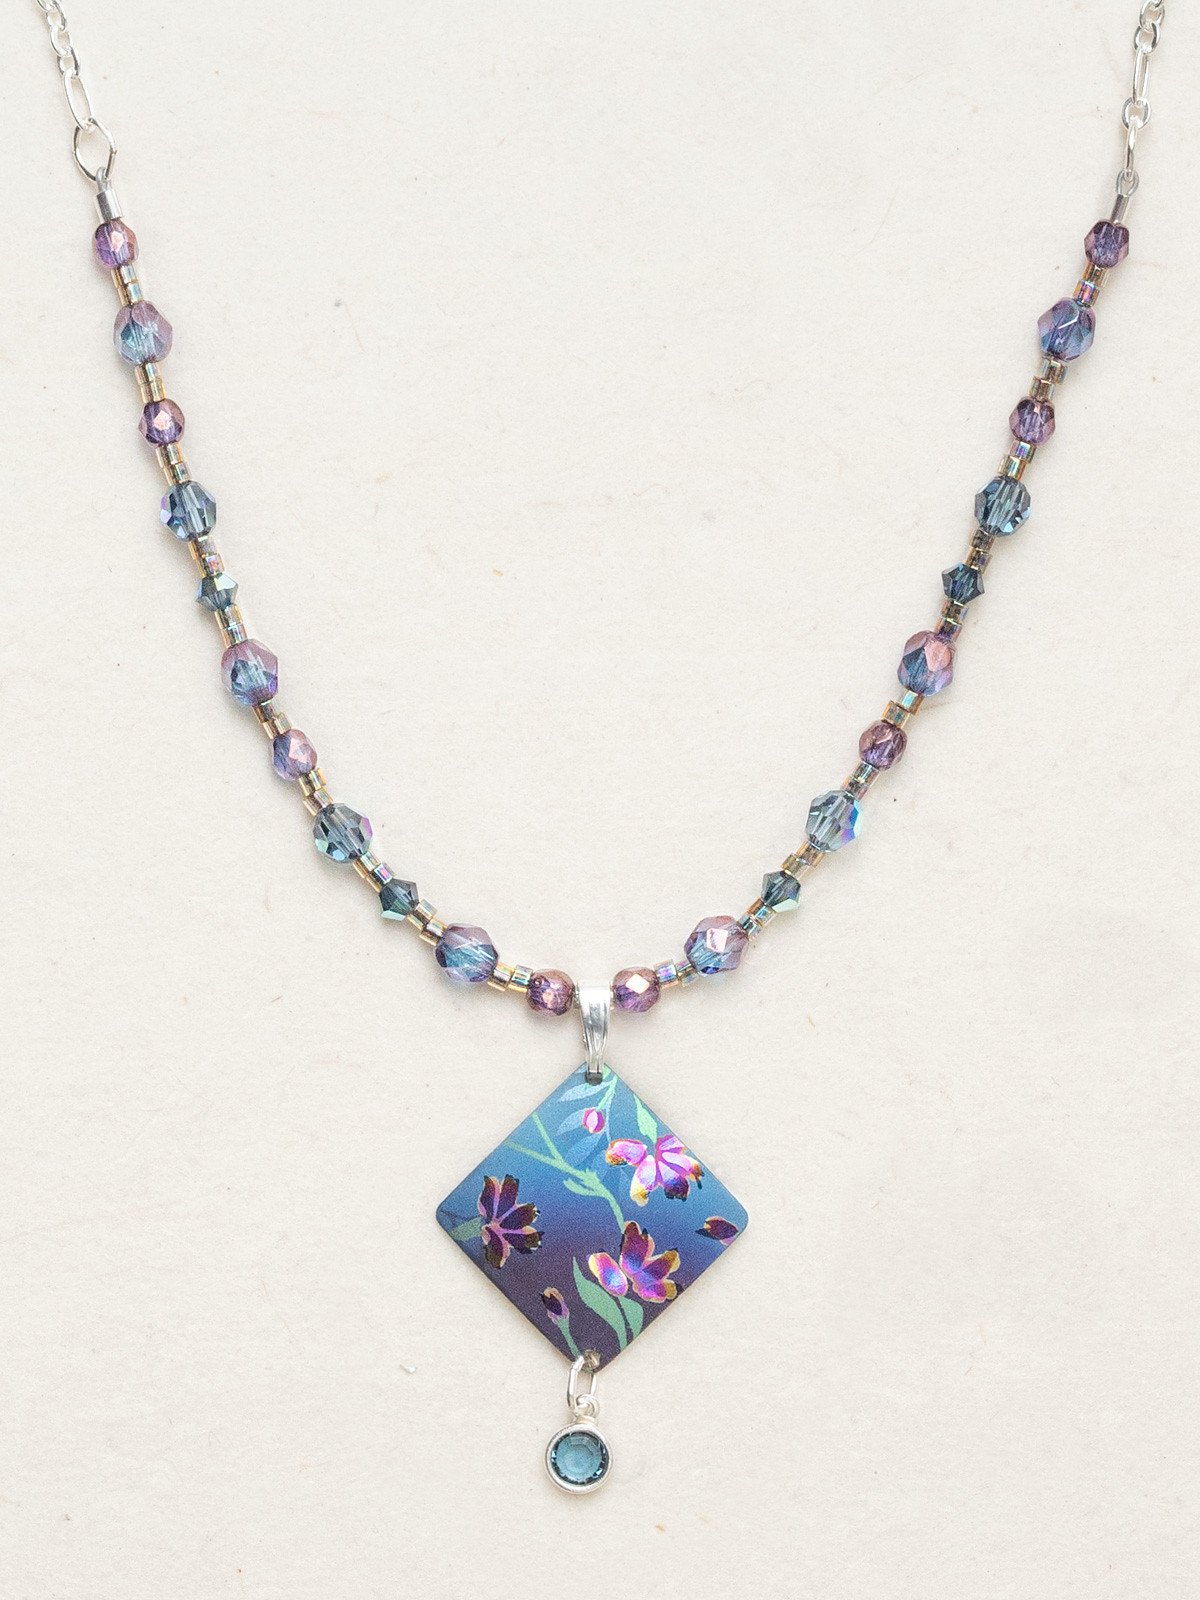 Blue and purple beaded Holly Yashi necklace with pendant